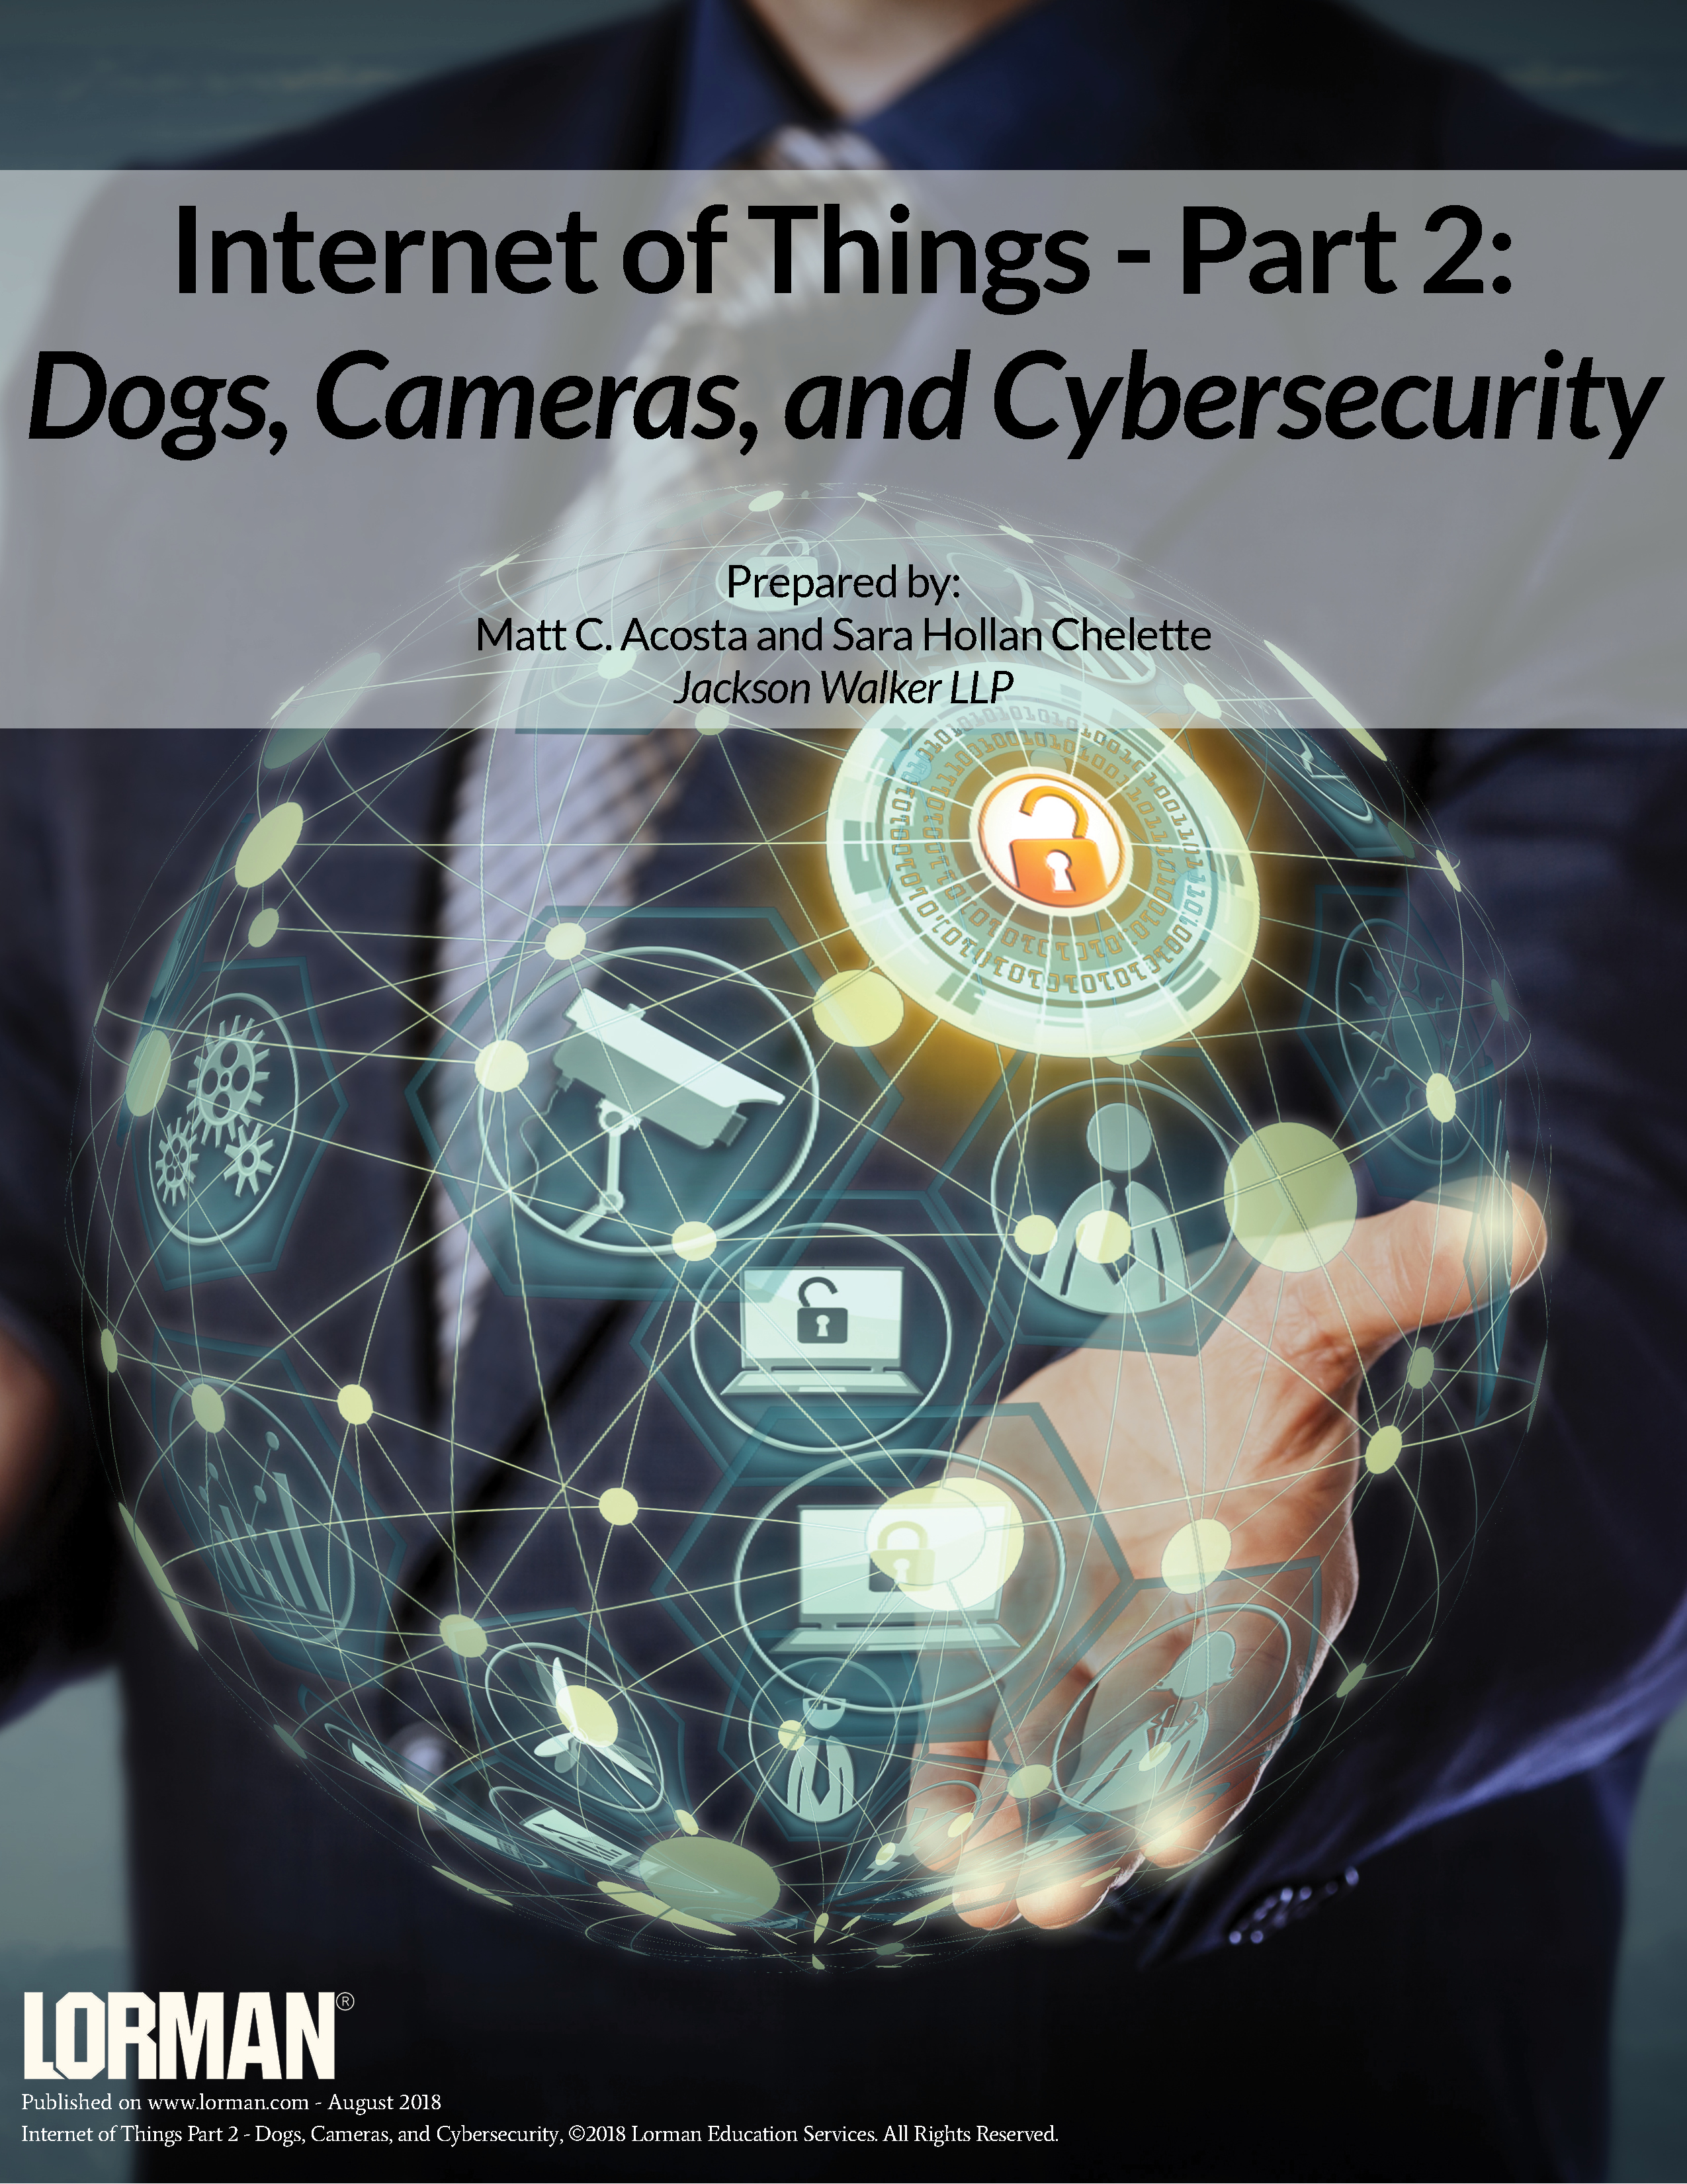 Internet of Things Part 2: Dogs, Cameras, and Cybersecurity